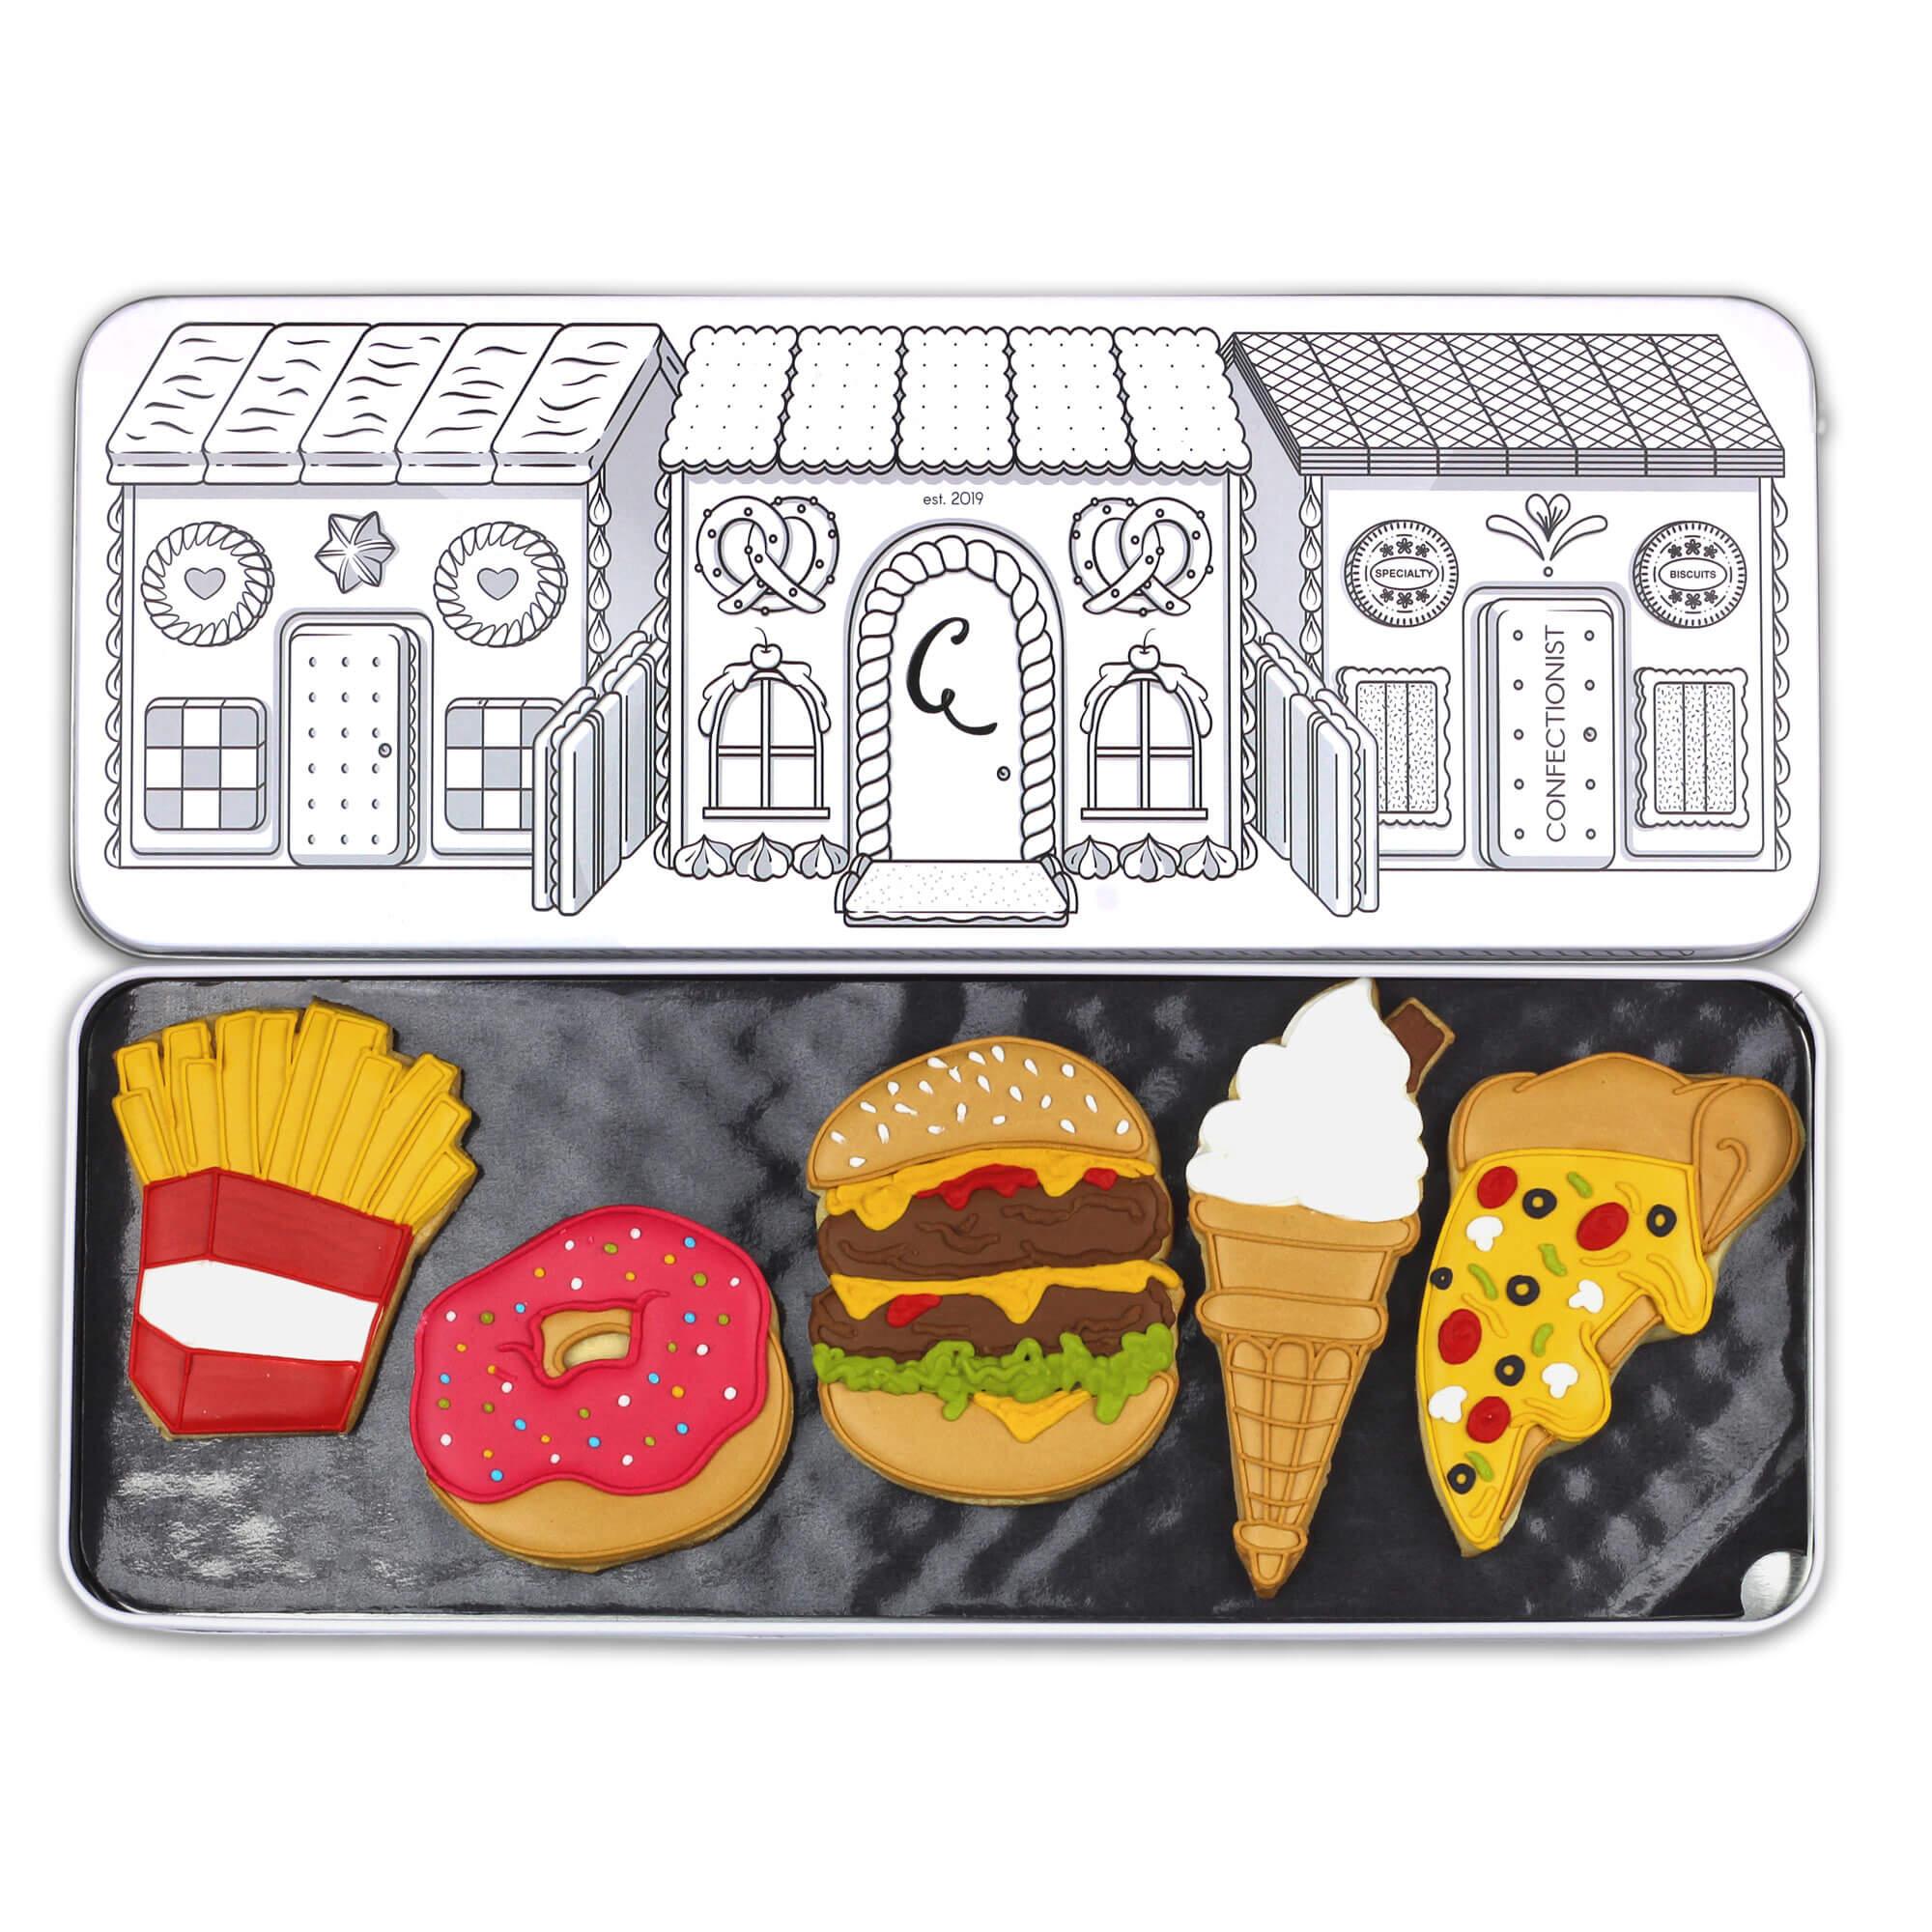 Product: Junk Food Set - The Confectionist